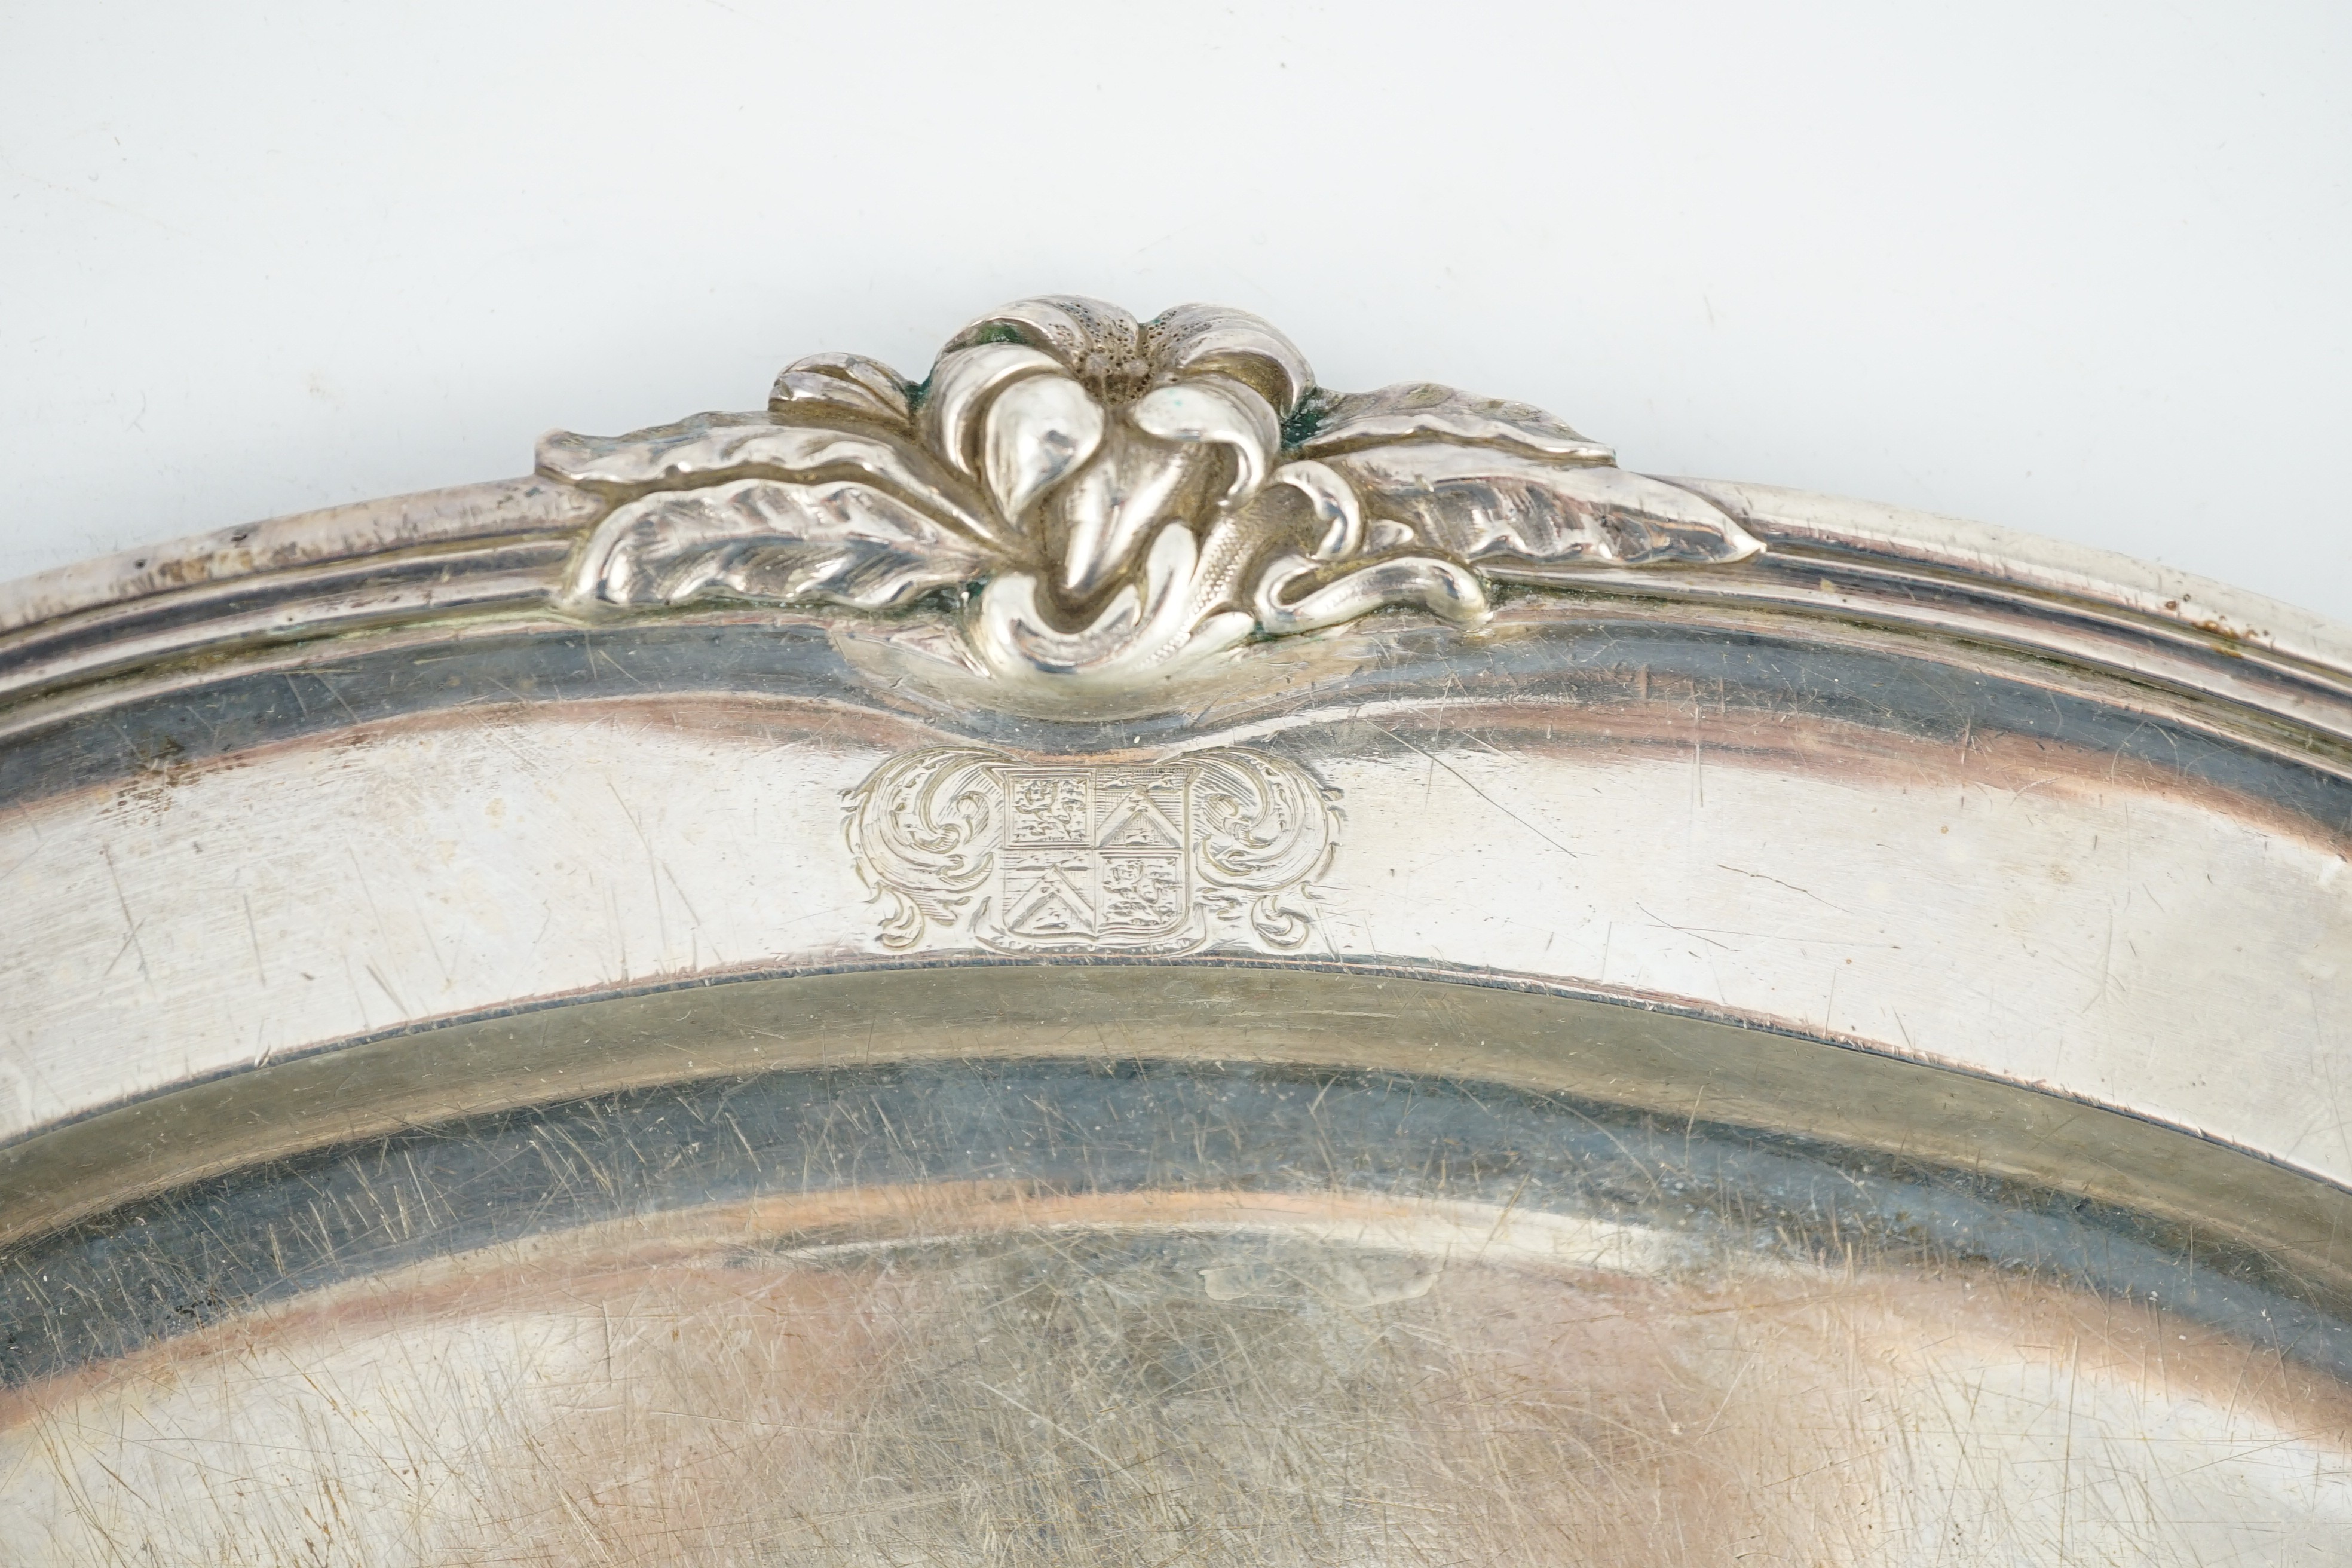 A William IV oval silver meat dish by William Kerr Reid